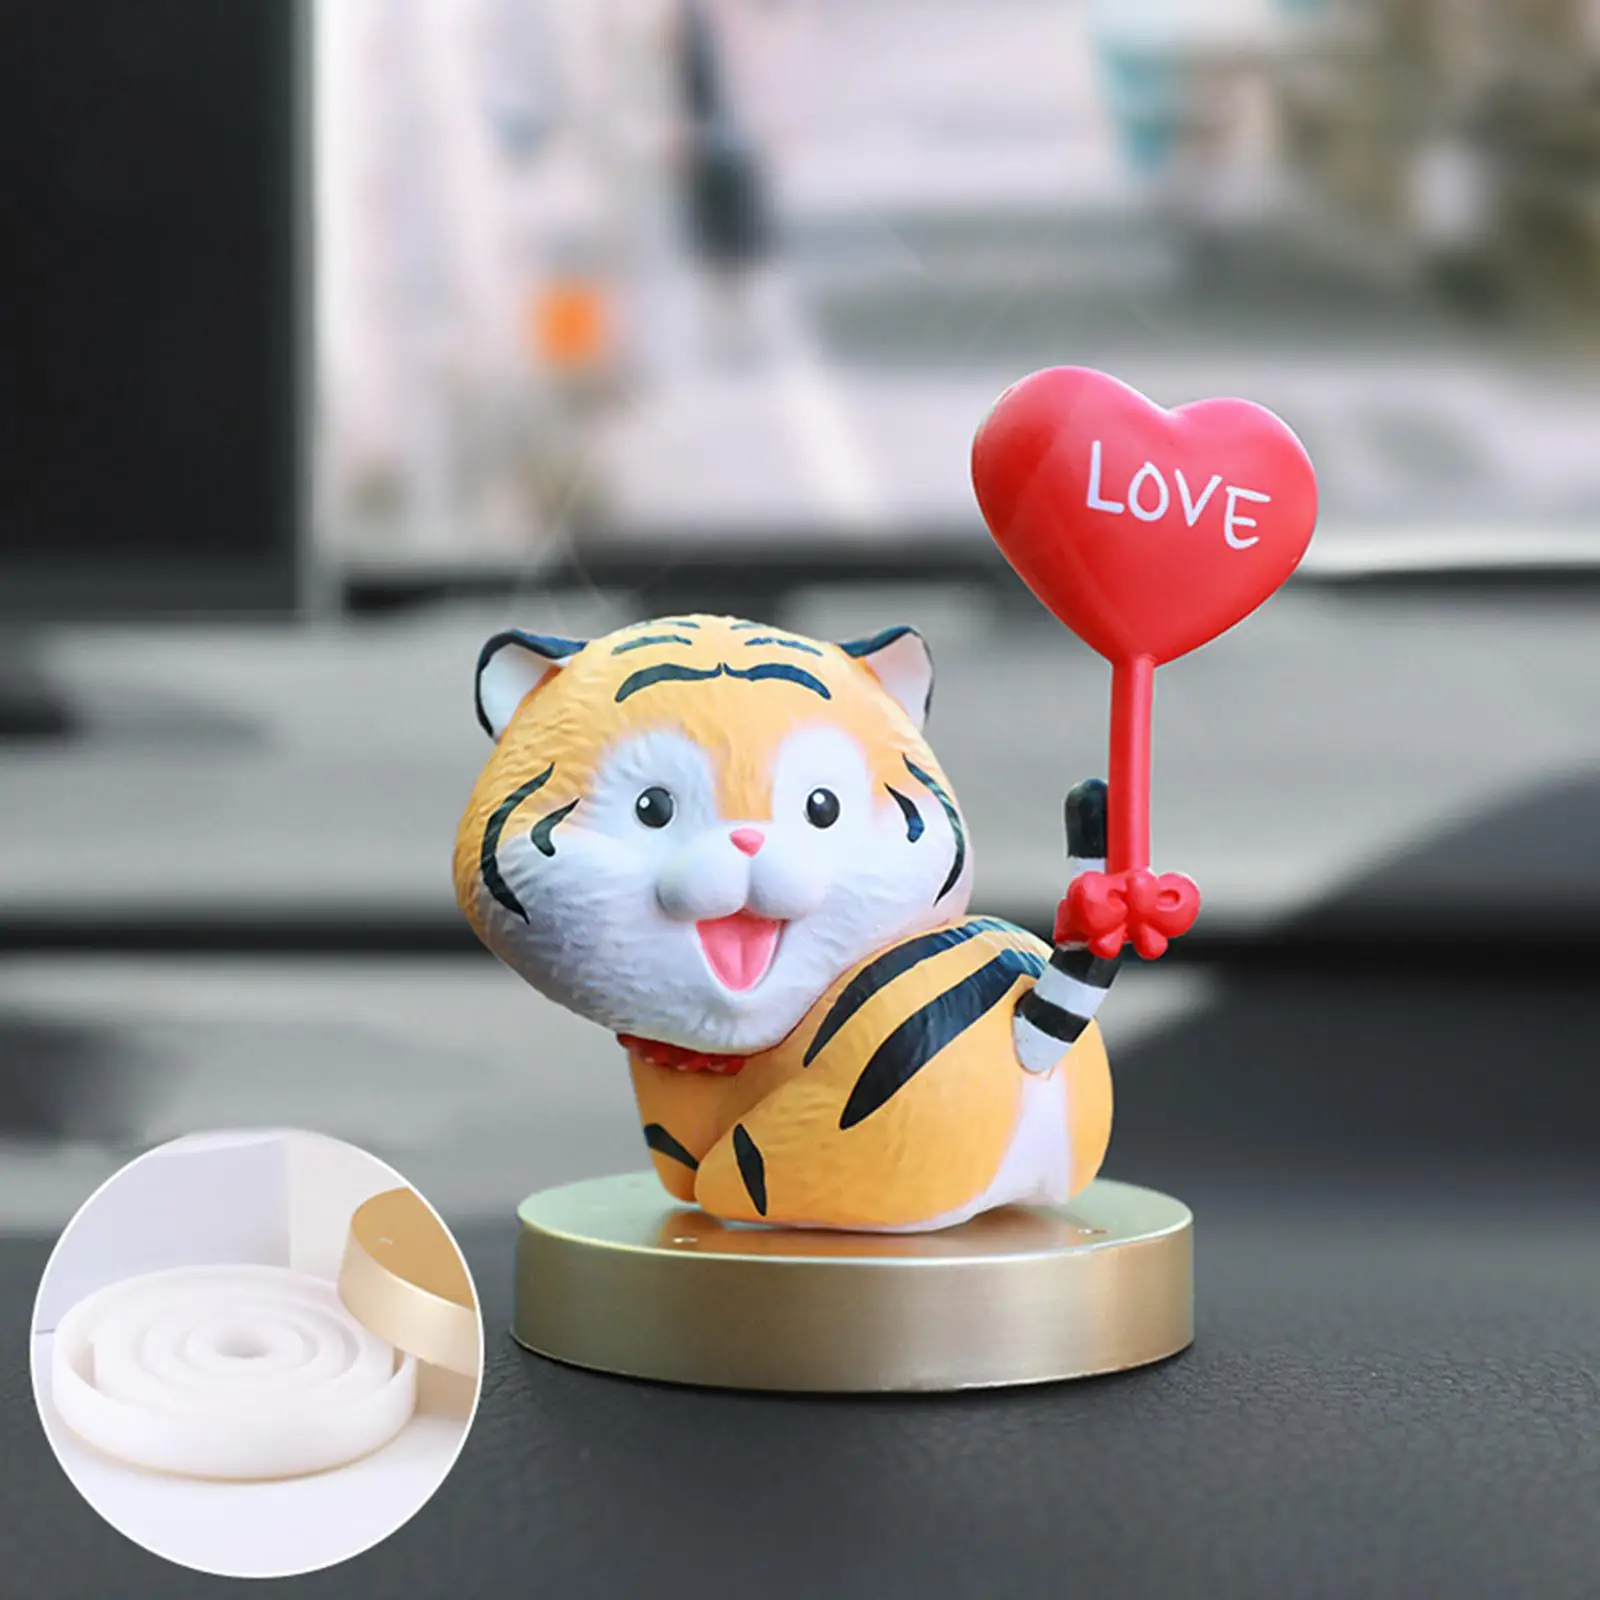 Car Air Freshener Ornament  Miniatures Figurines Crafts Fragrance Diffuser Statue Fortune Fit for Desktop Home Accessories